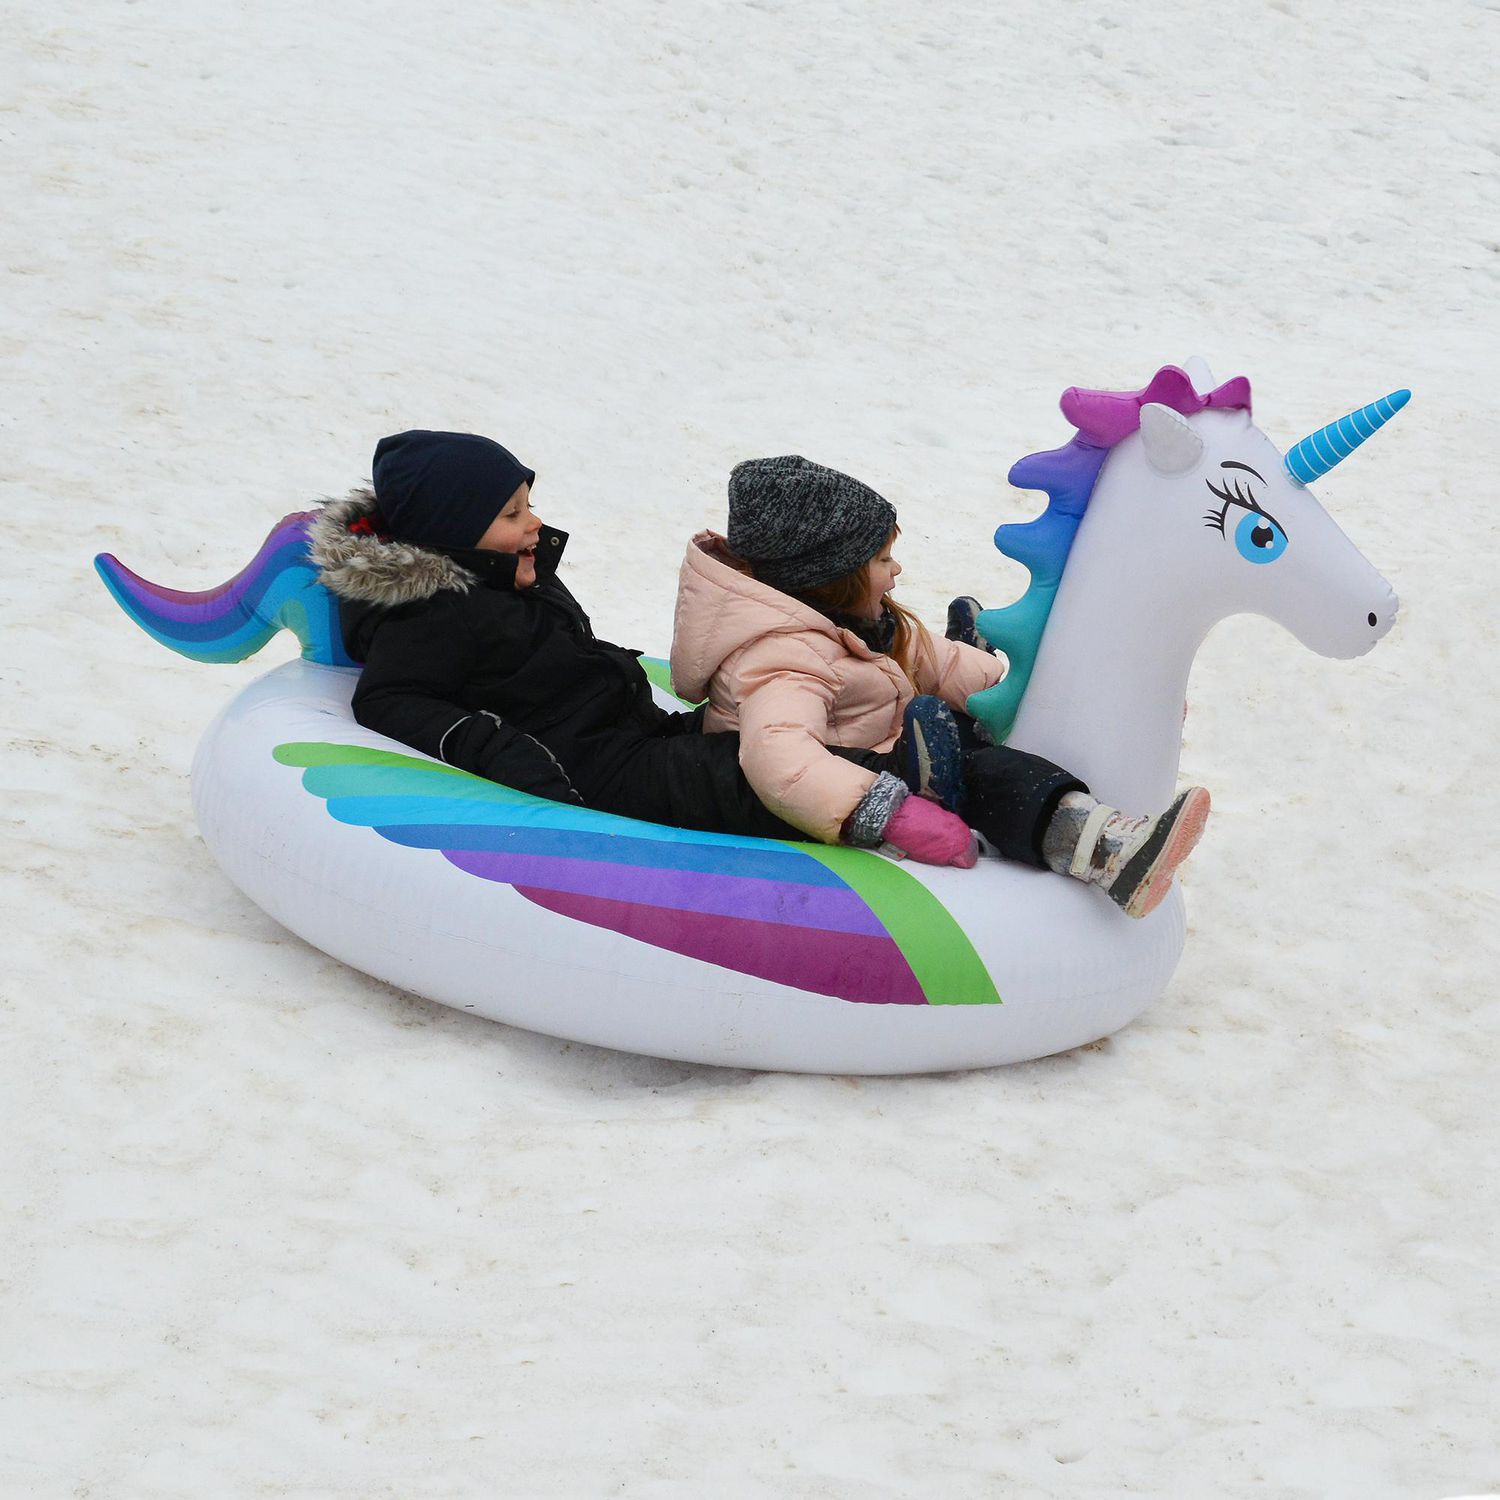 Heavy Duty Unicorn Snow Tube Double-Layer Unicorn Tube Snow Toys Outdoor Inflatable sleds for Snow SPERPAND Giant Snow Tube 